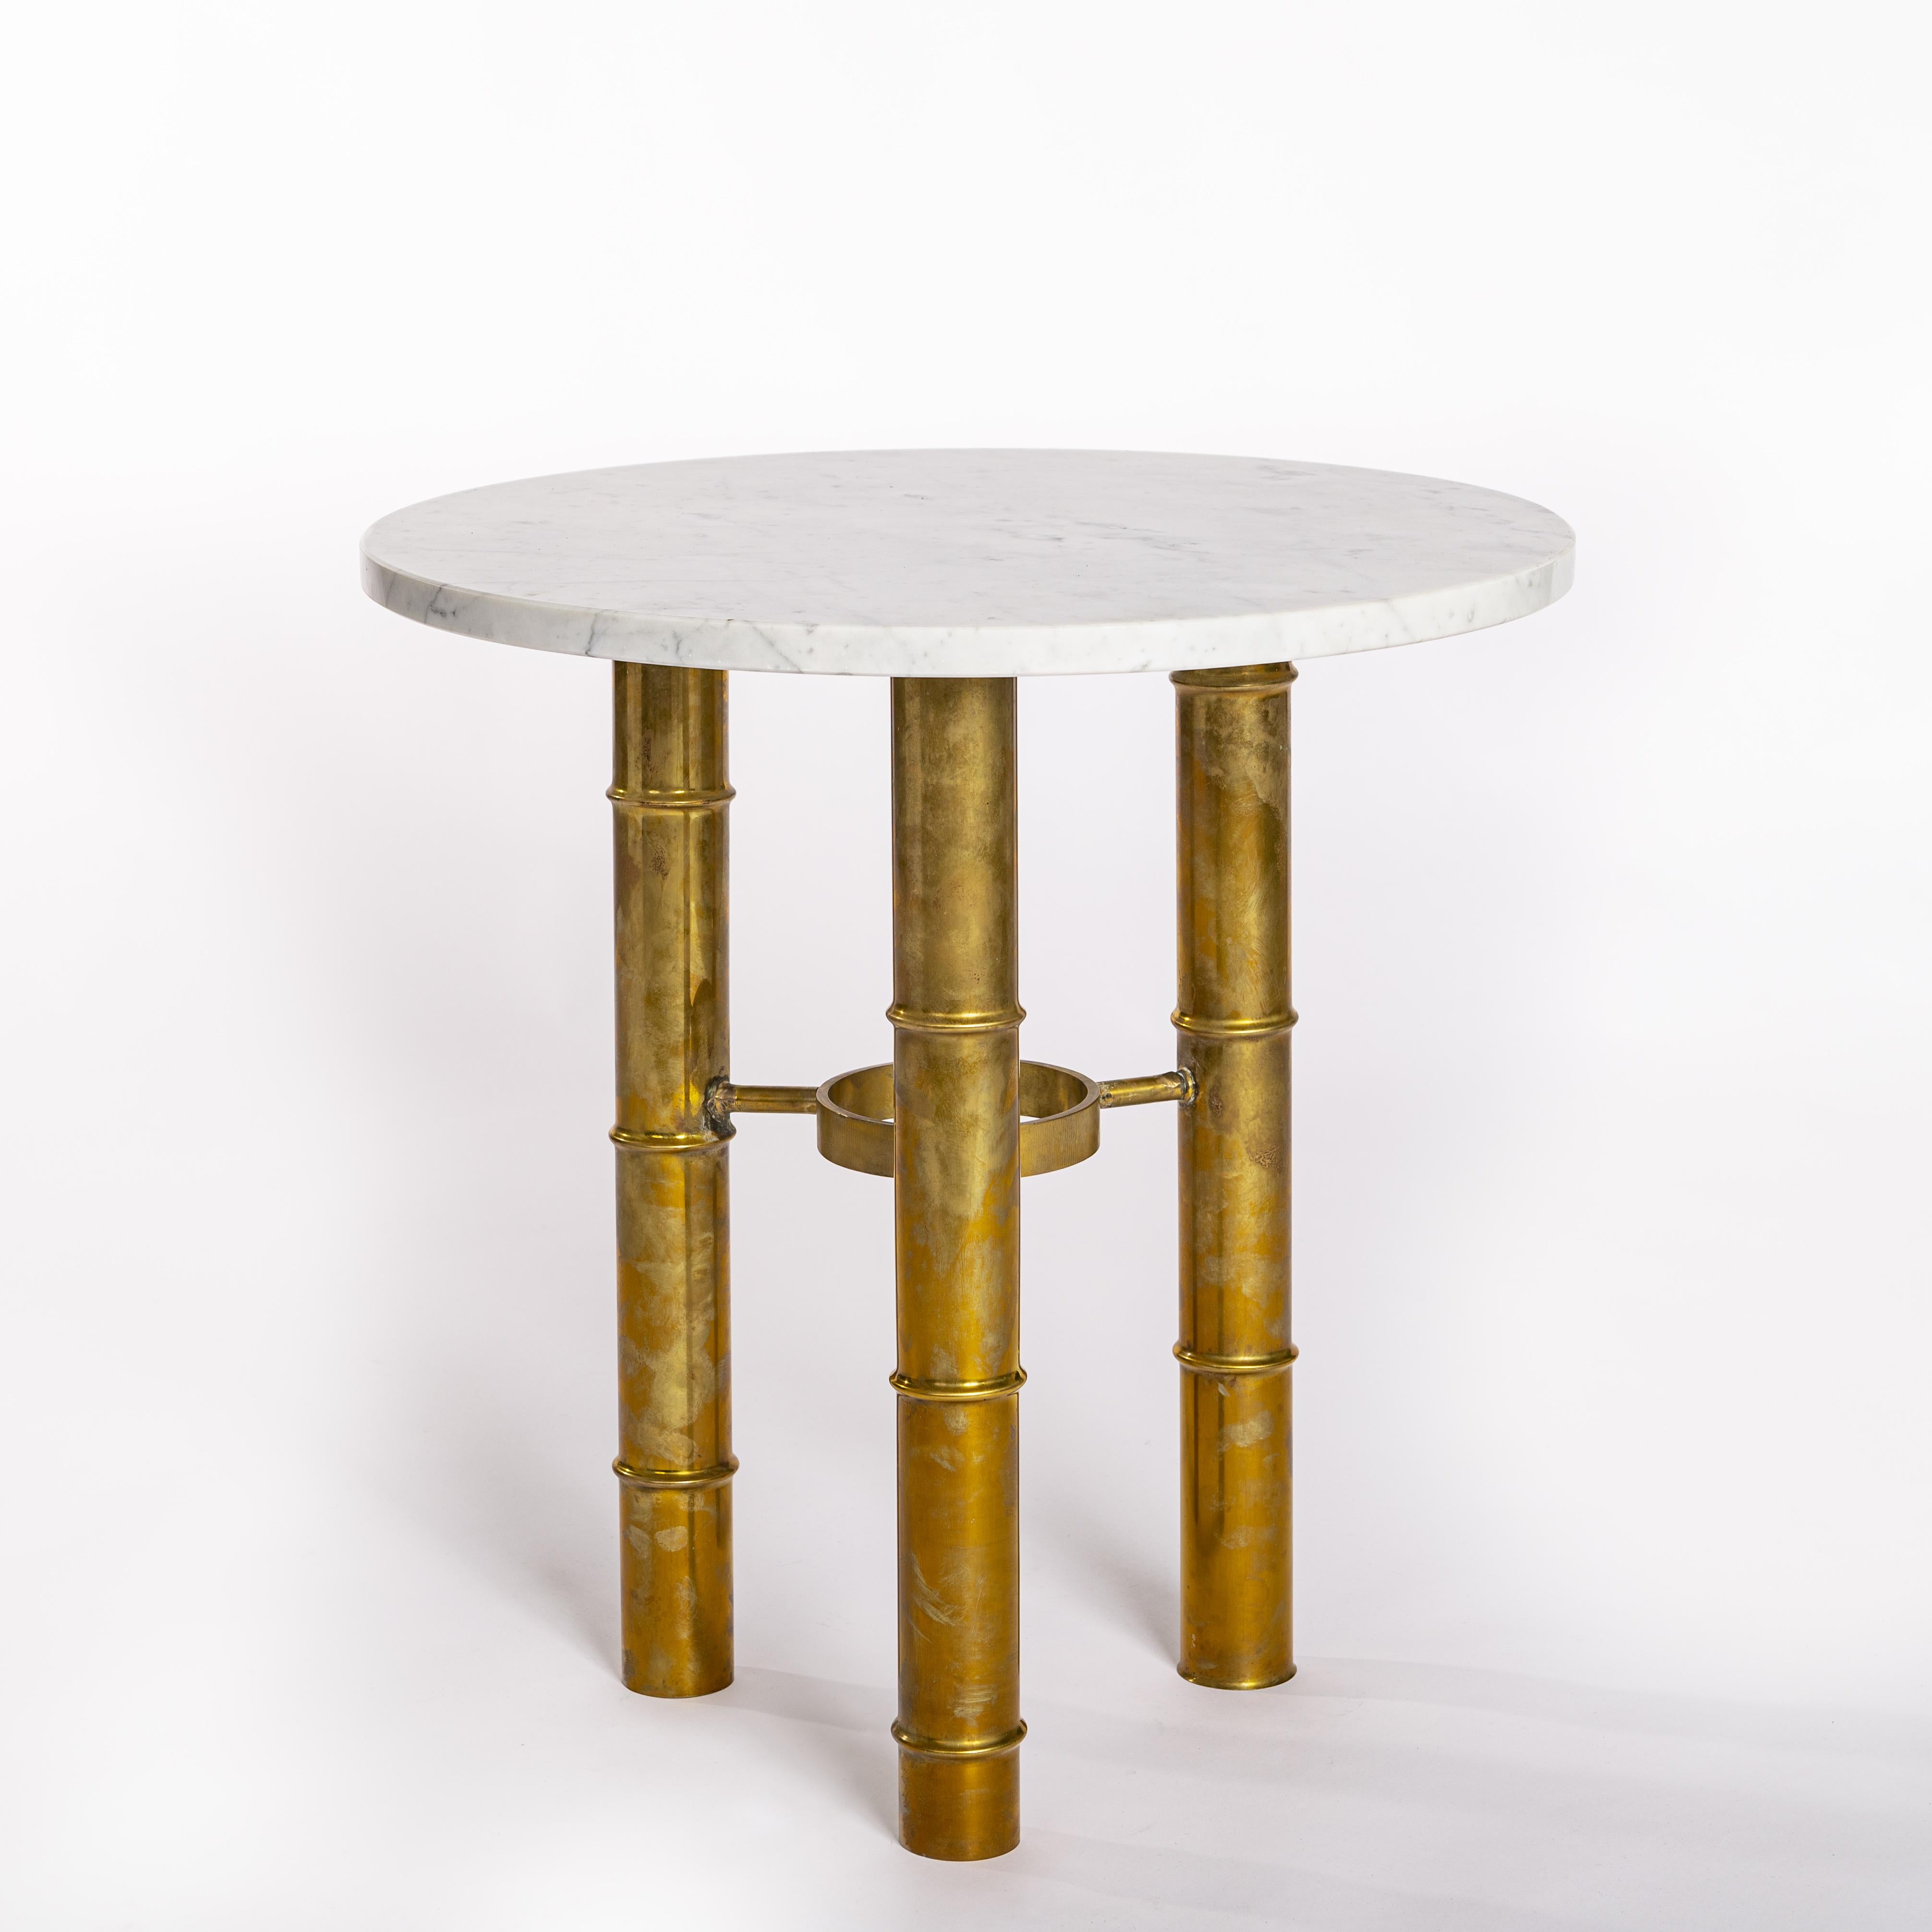 Cast Pair of French Mid-Century Side Tables Brass Bamboo Design White Marble Top 70s For Sale